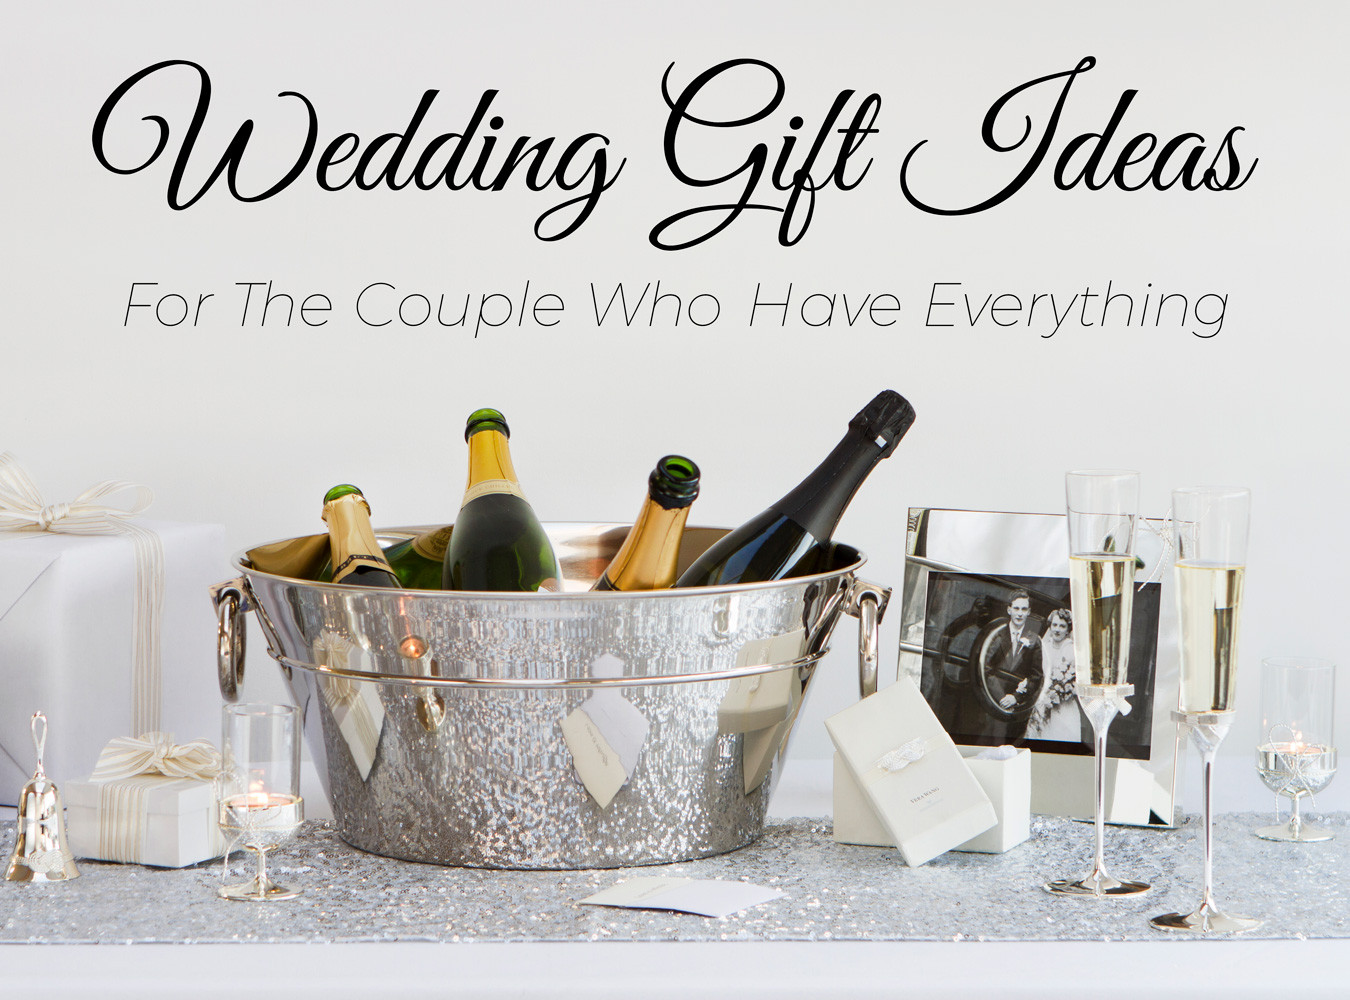 Engagement Gift Ideas For The Couple
 5 Wedding Gift Ideas for the Couple Who Have Everything